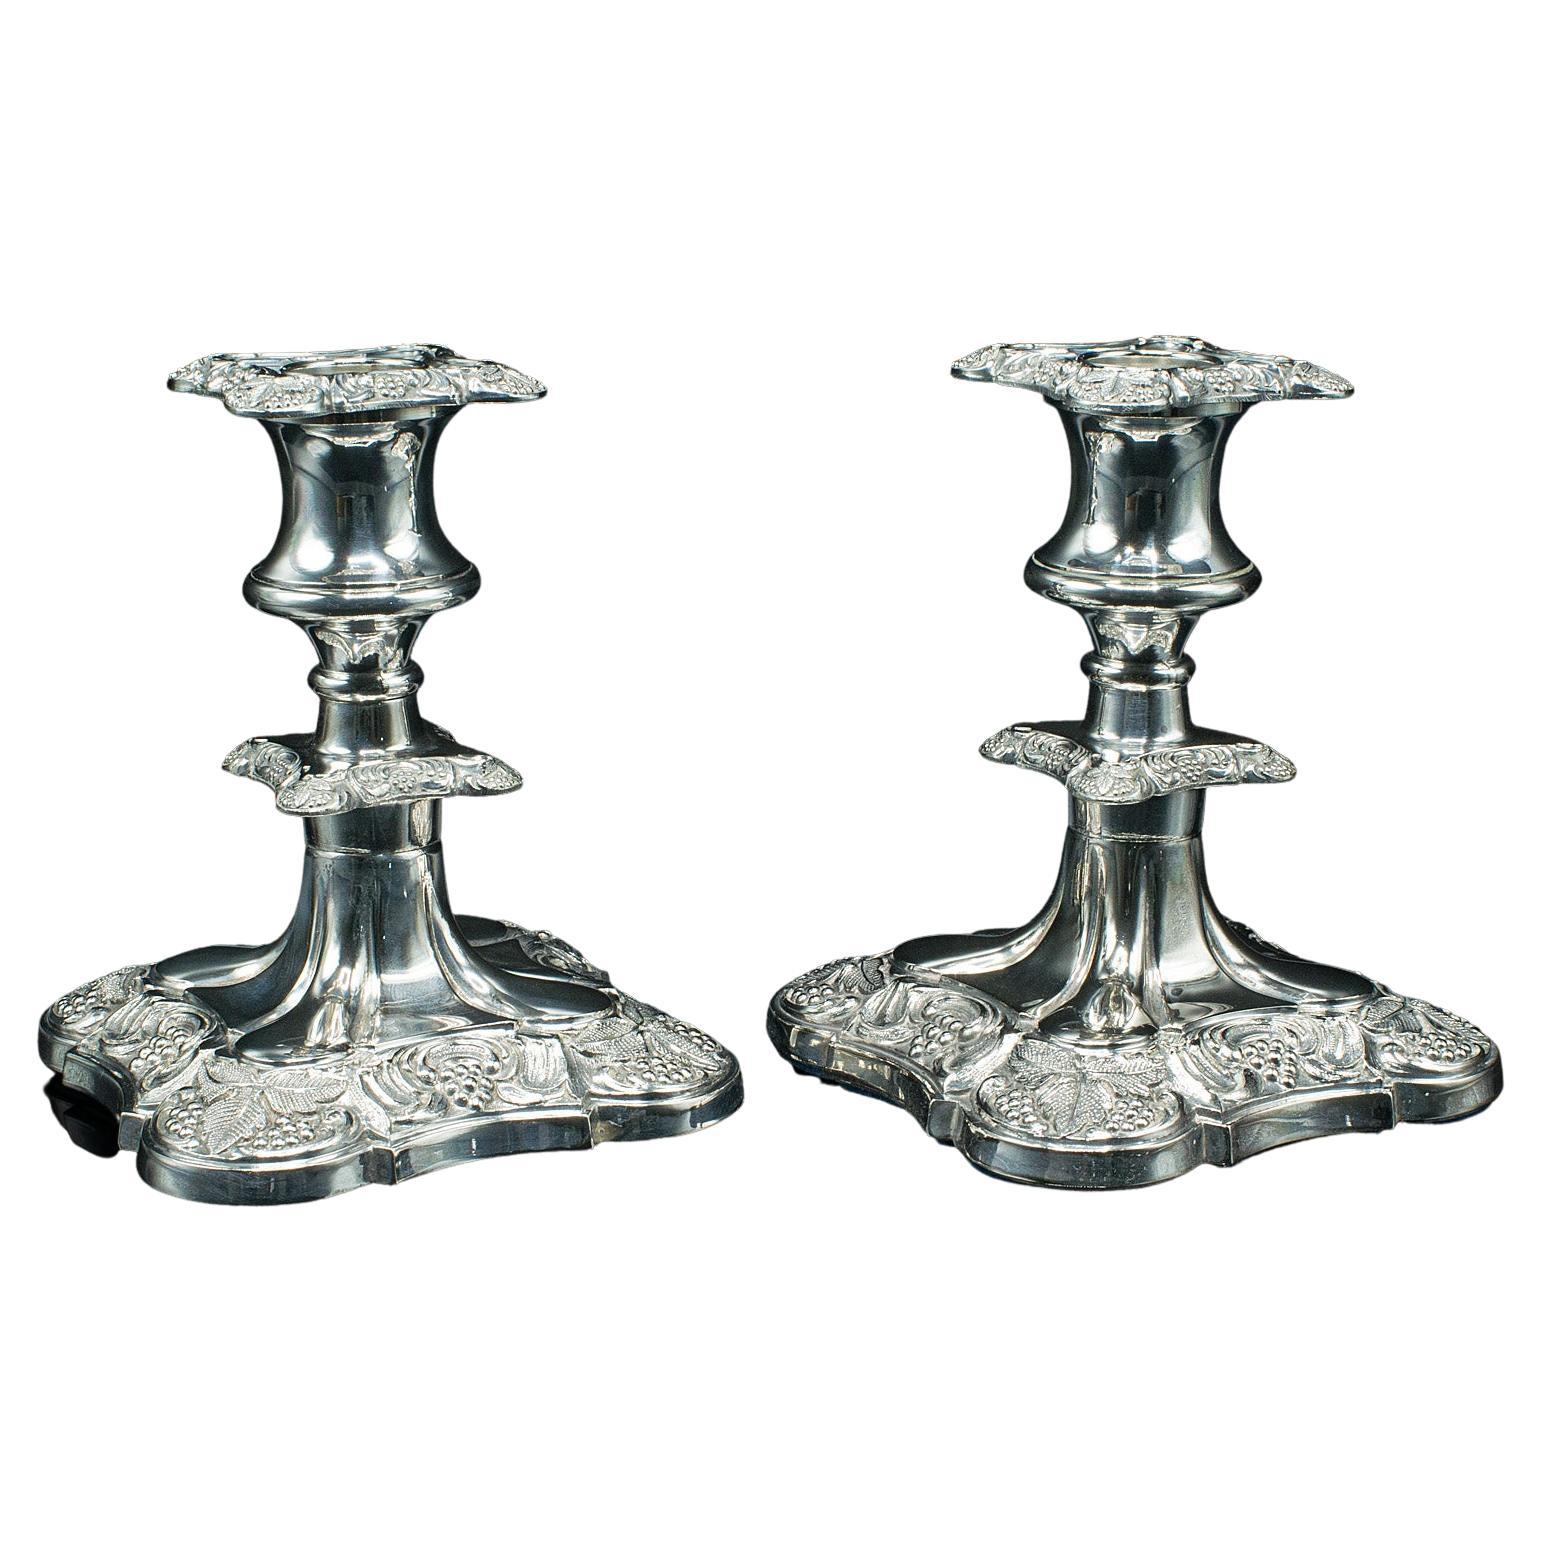 Pair of Antique Candlesticks, Silver Plate, Decorative, Candle Holder, Victorian For Sale